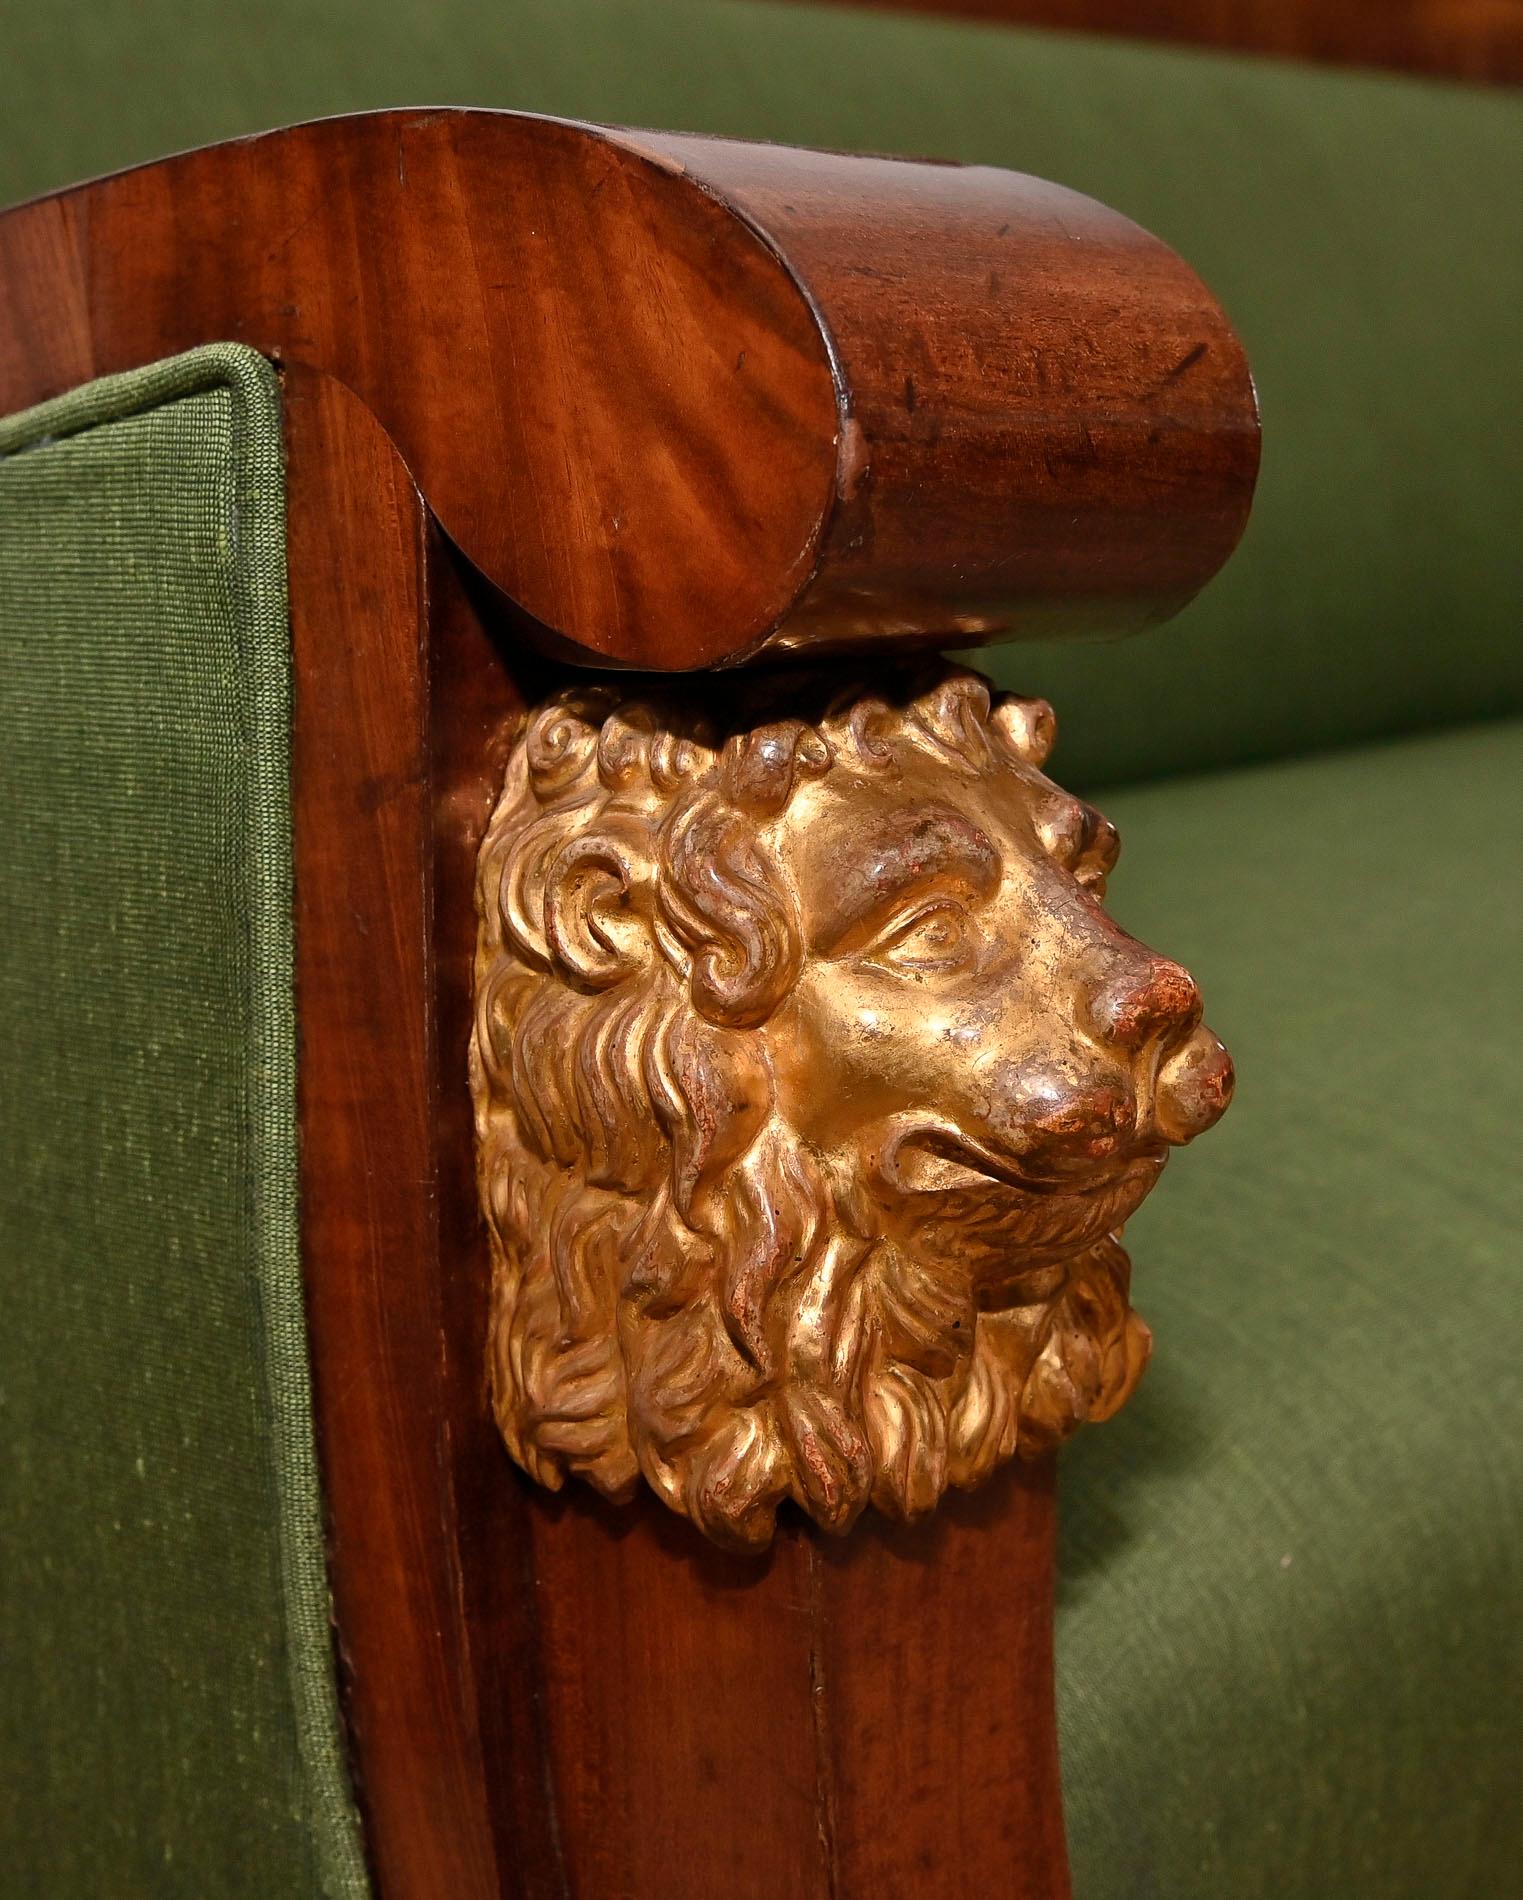 19th Century Empire Sofa Berlin Brandenburg Mahogany Carved Gilded Lions In Good Condition For Sale In Epfach, DE